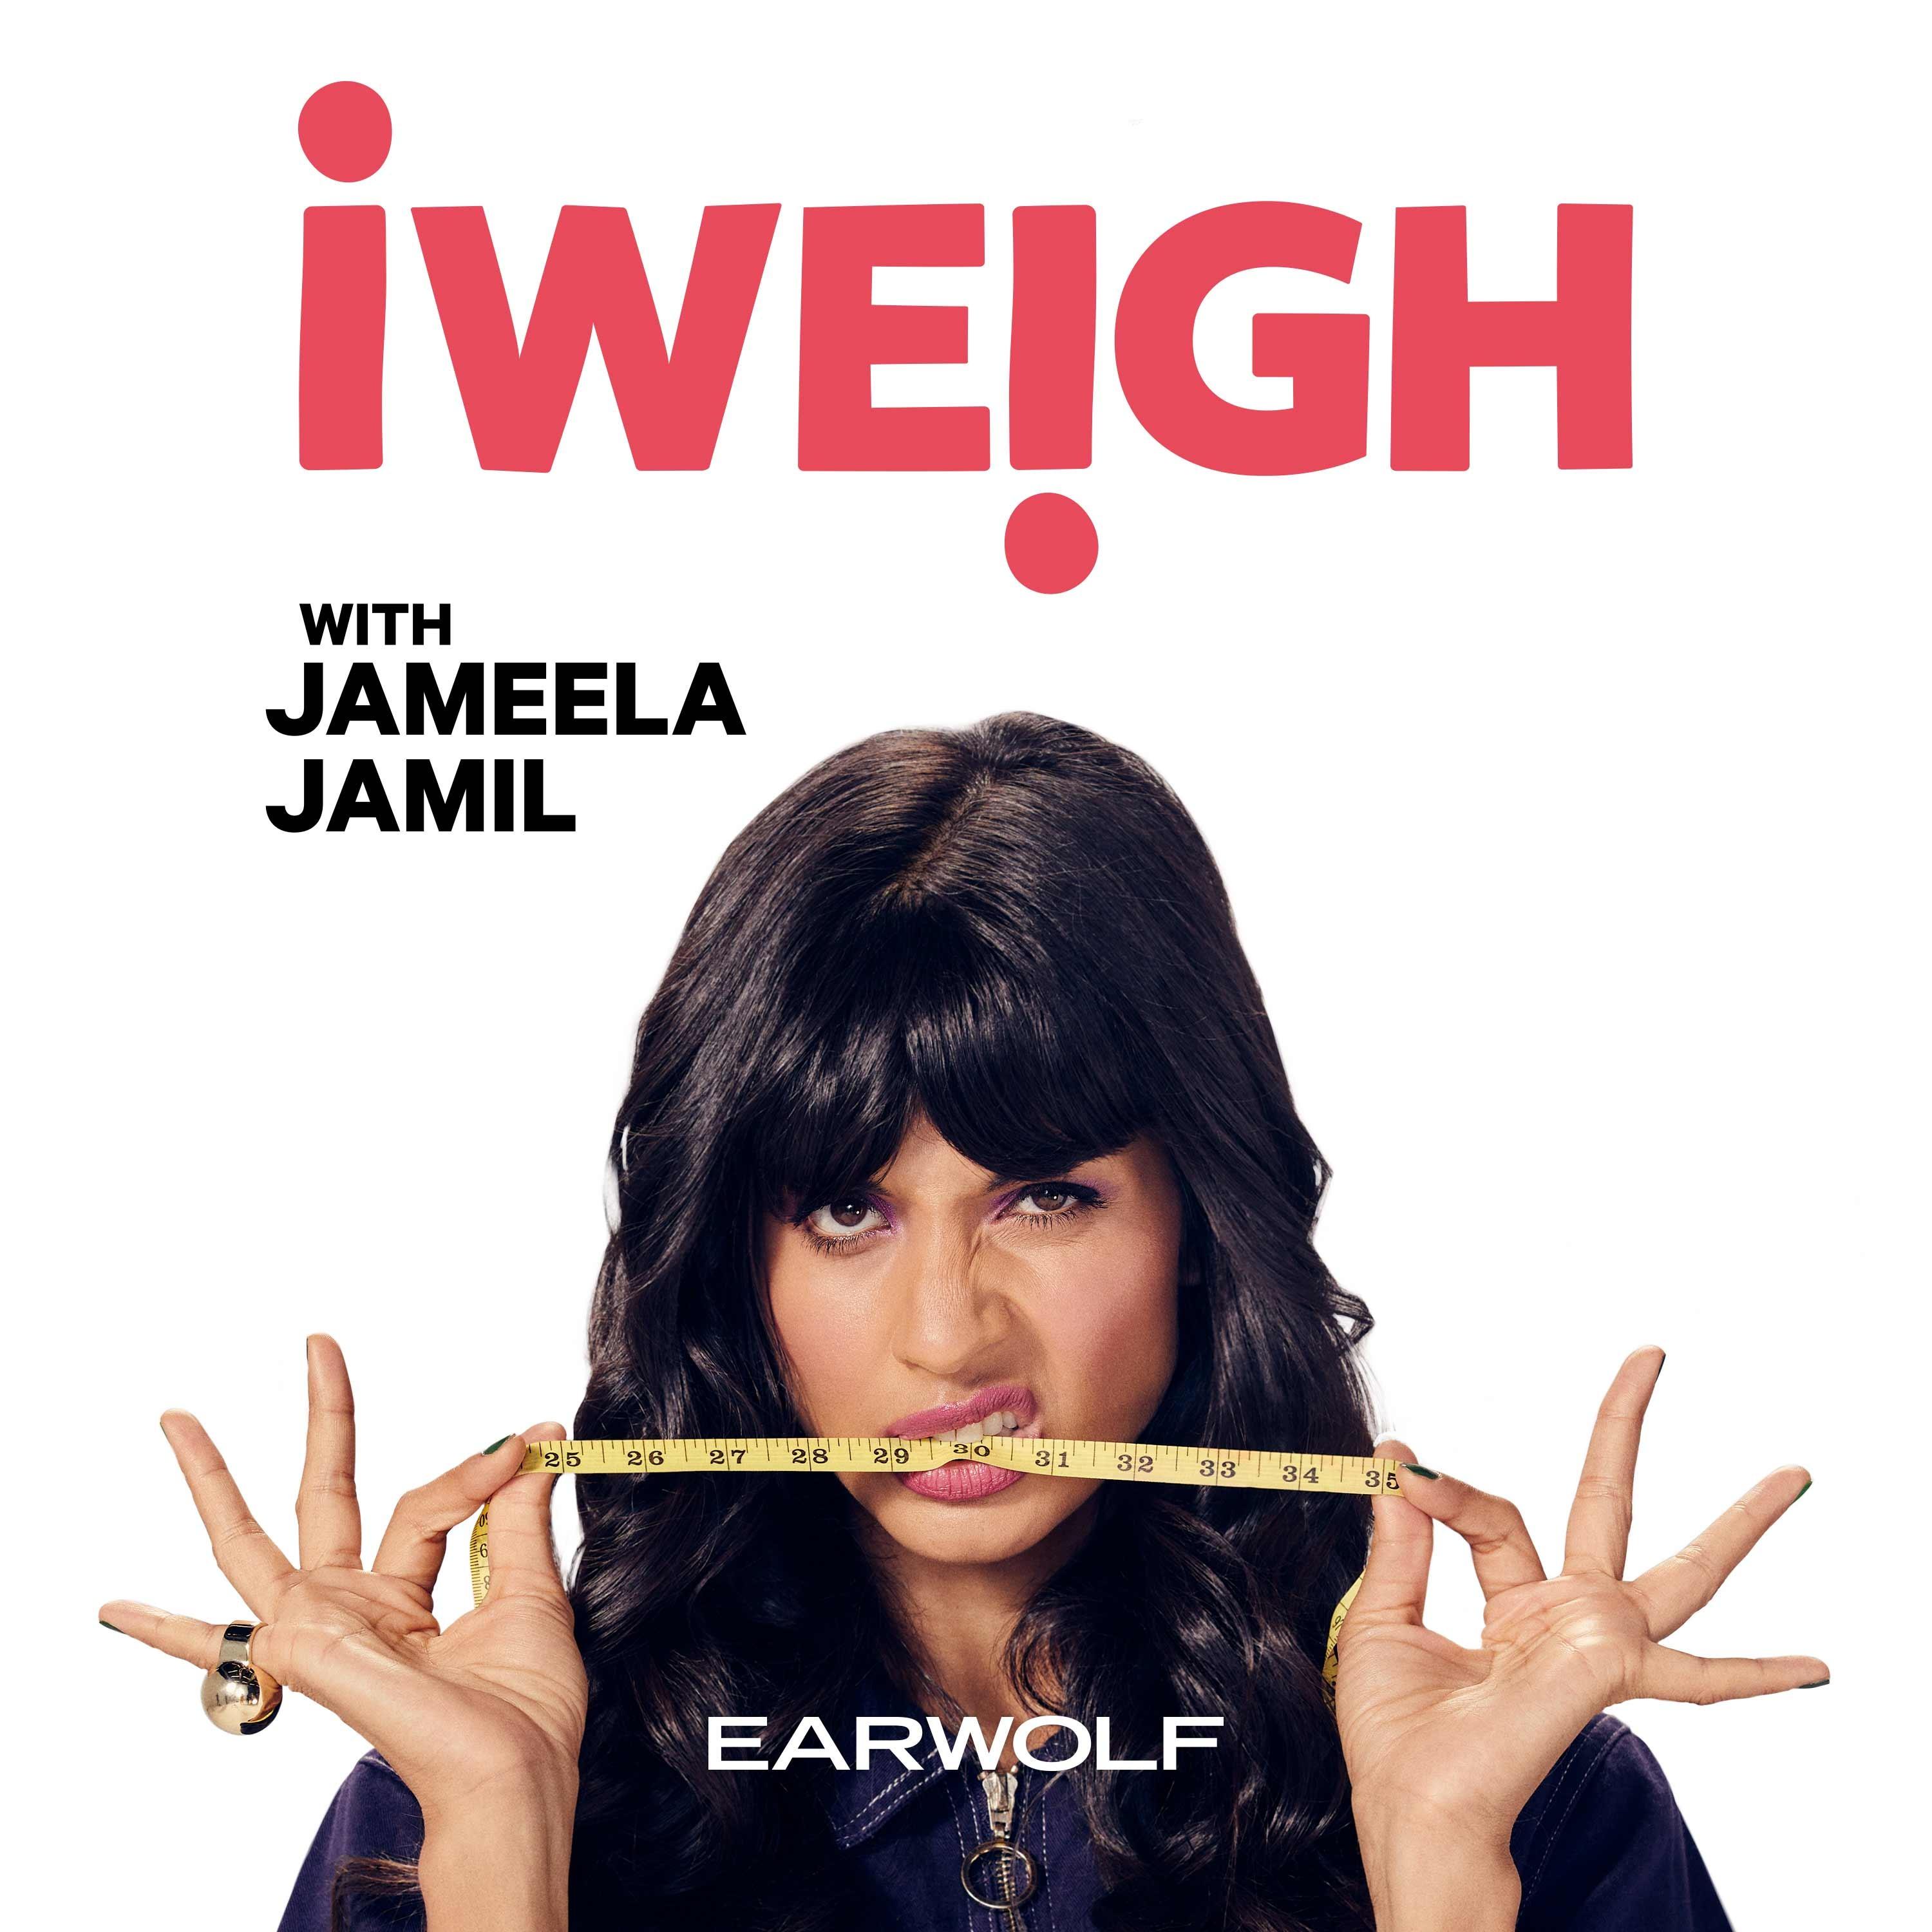 Show poster of I Weigh with Jameela Jamil